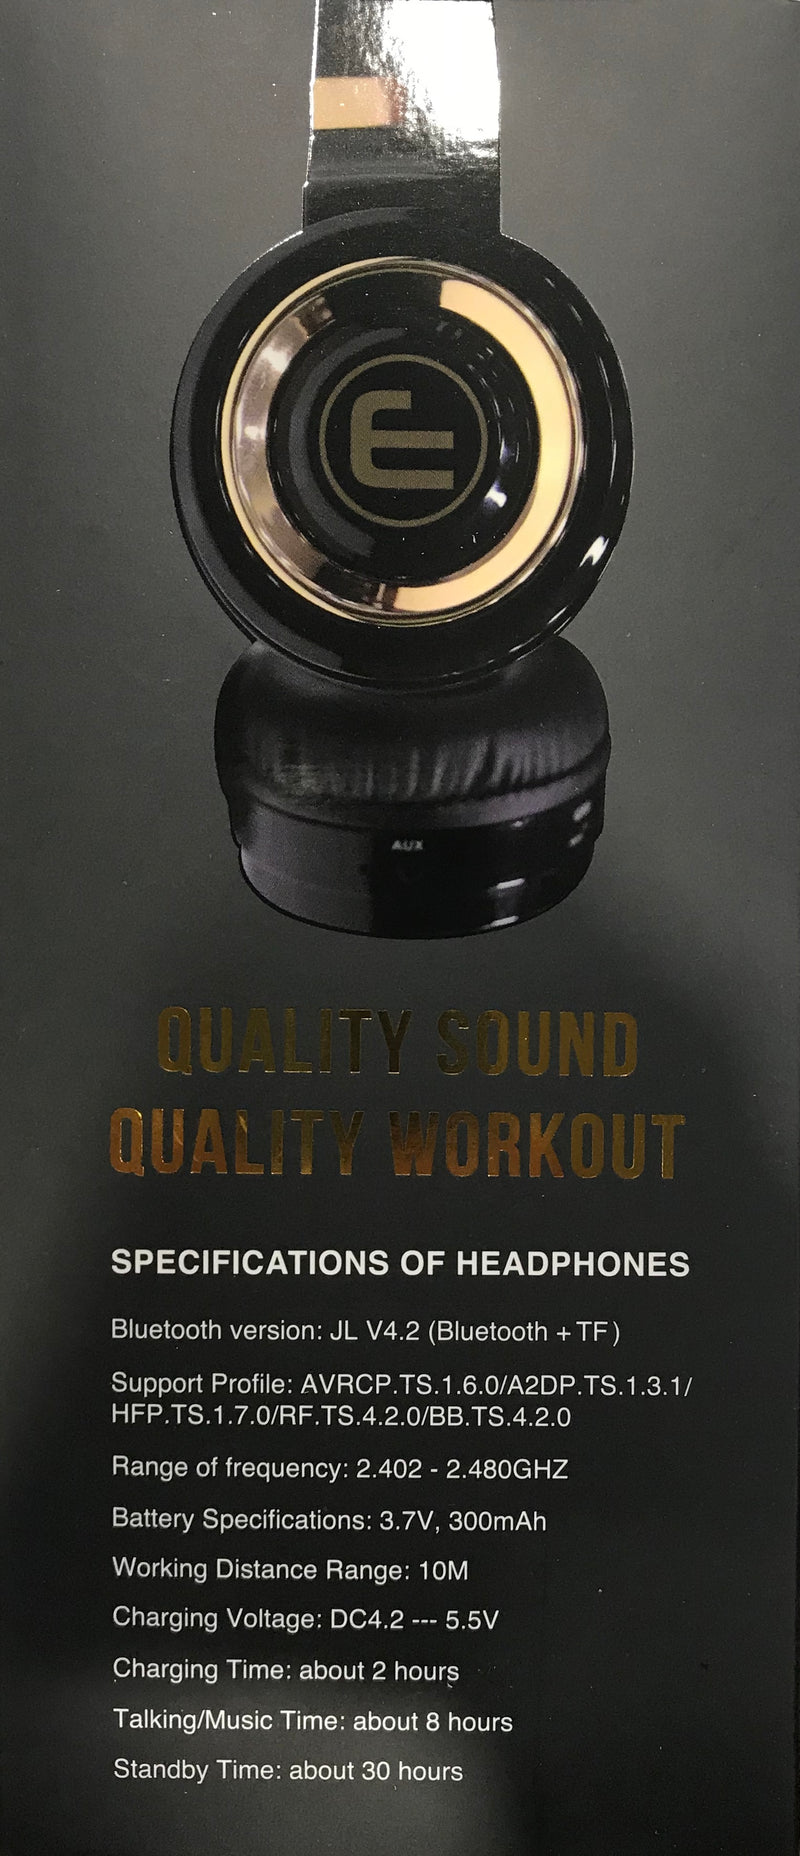 FIT TECH Evolution Wireless Headphones Fittech Evolution FOCUS 1.0 earphones are designed with athletes in mind. With high quality wireless bluetooth audio Famous Rock Shop Newcastle 2300 NSW Australia